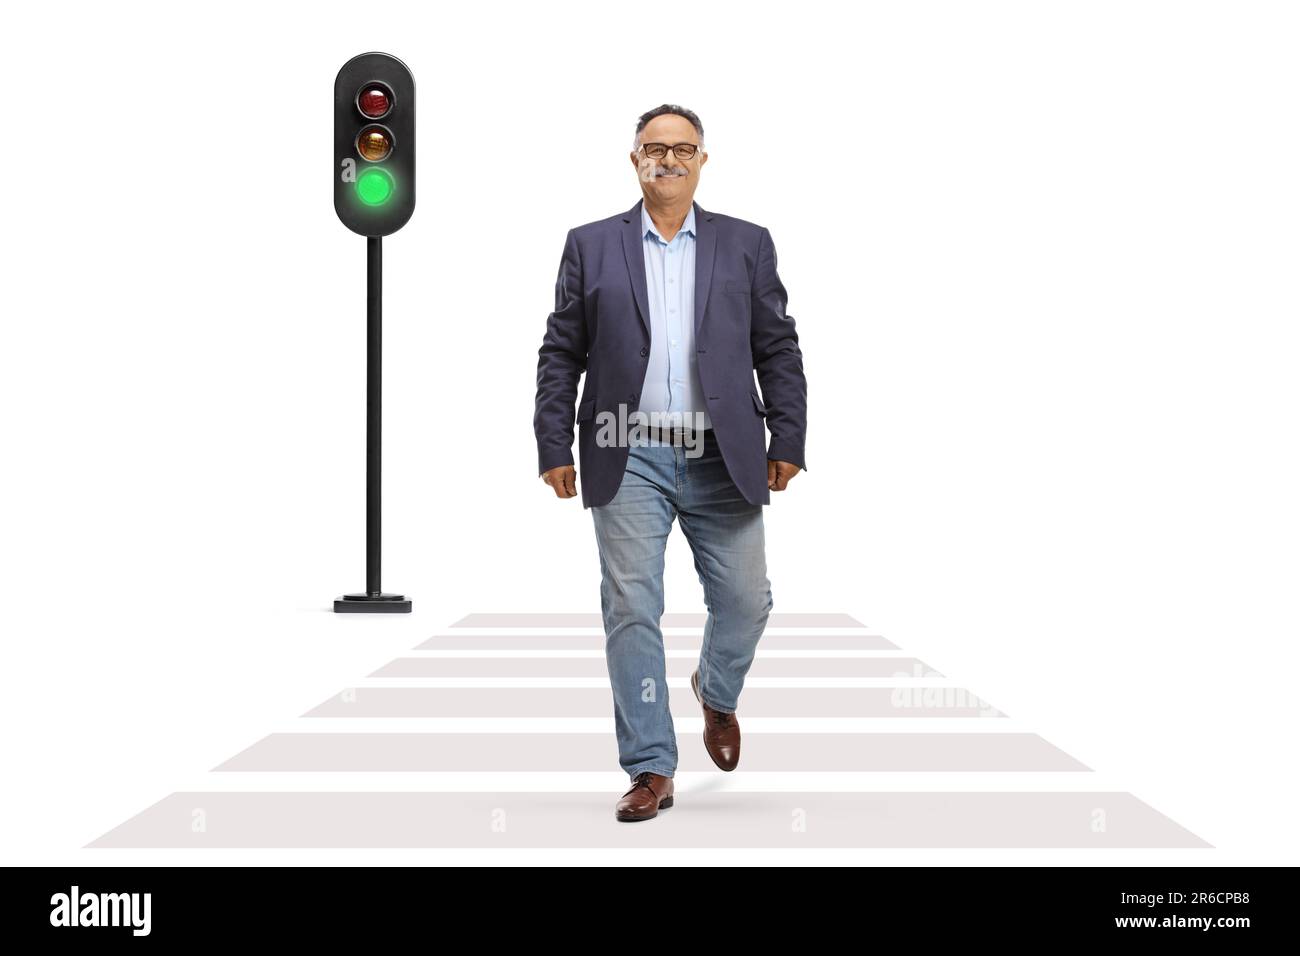 Full length portrait of a mature man in jeans and suit walking across a street at green traffic light isolated on white background Stock Photo